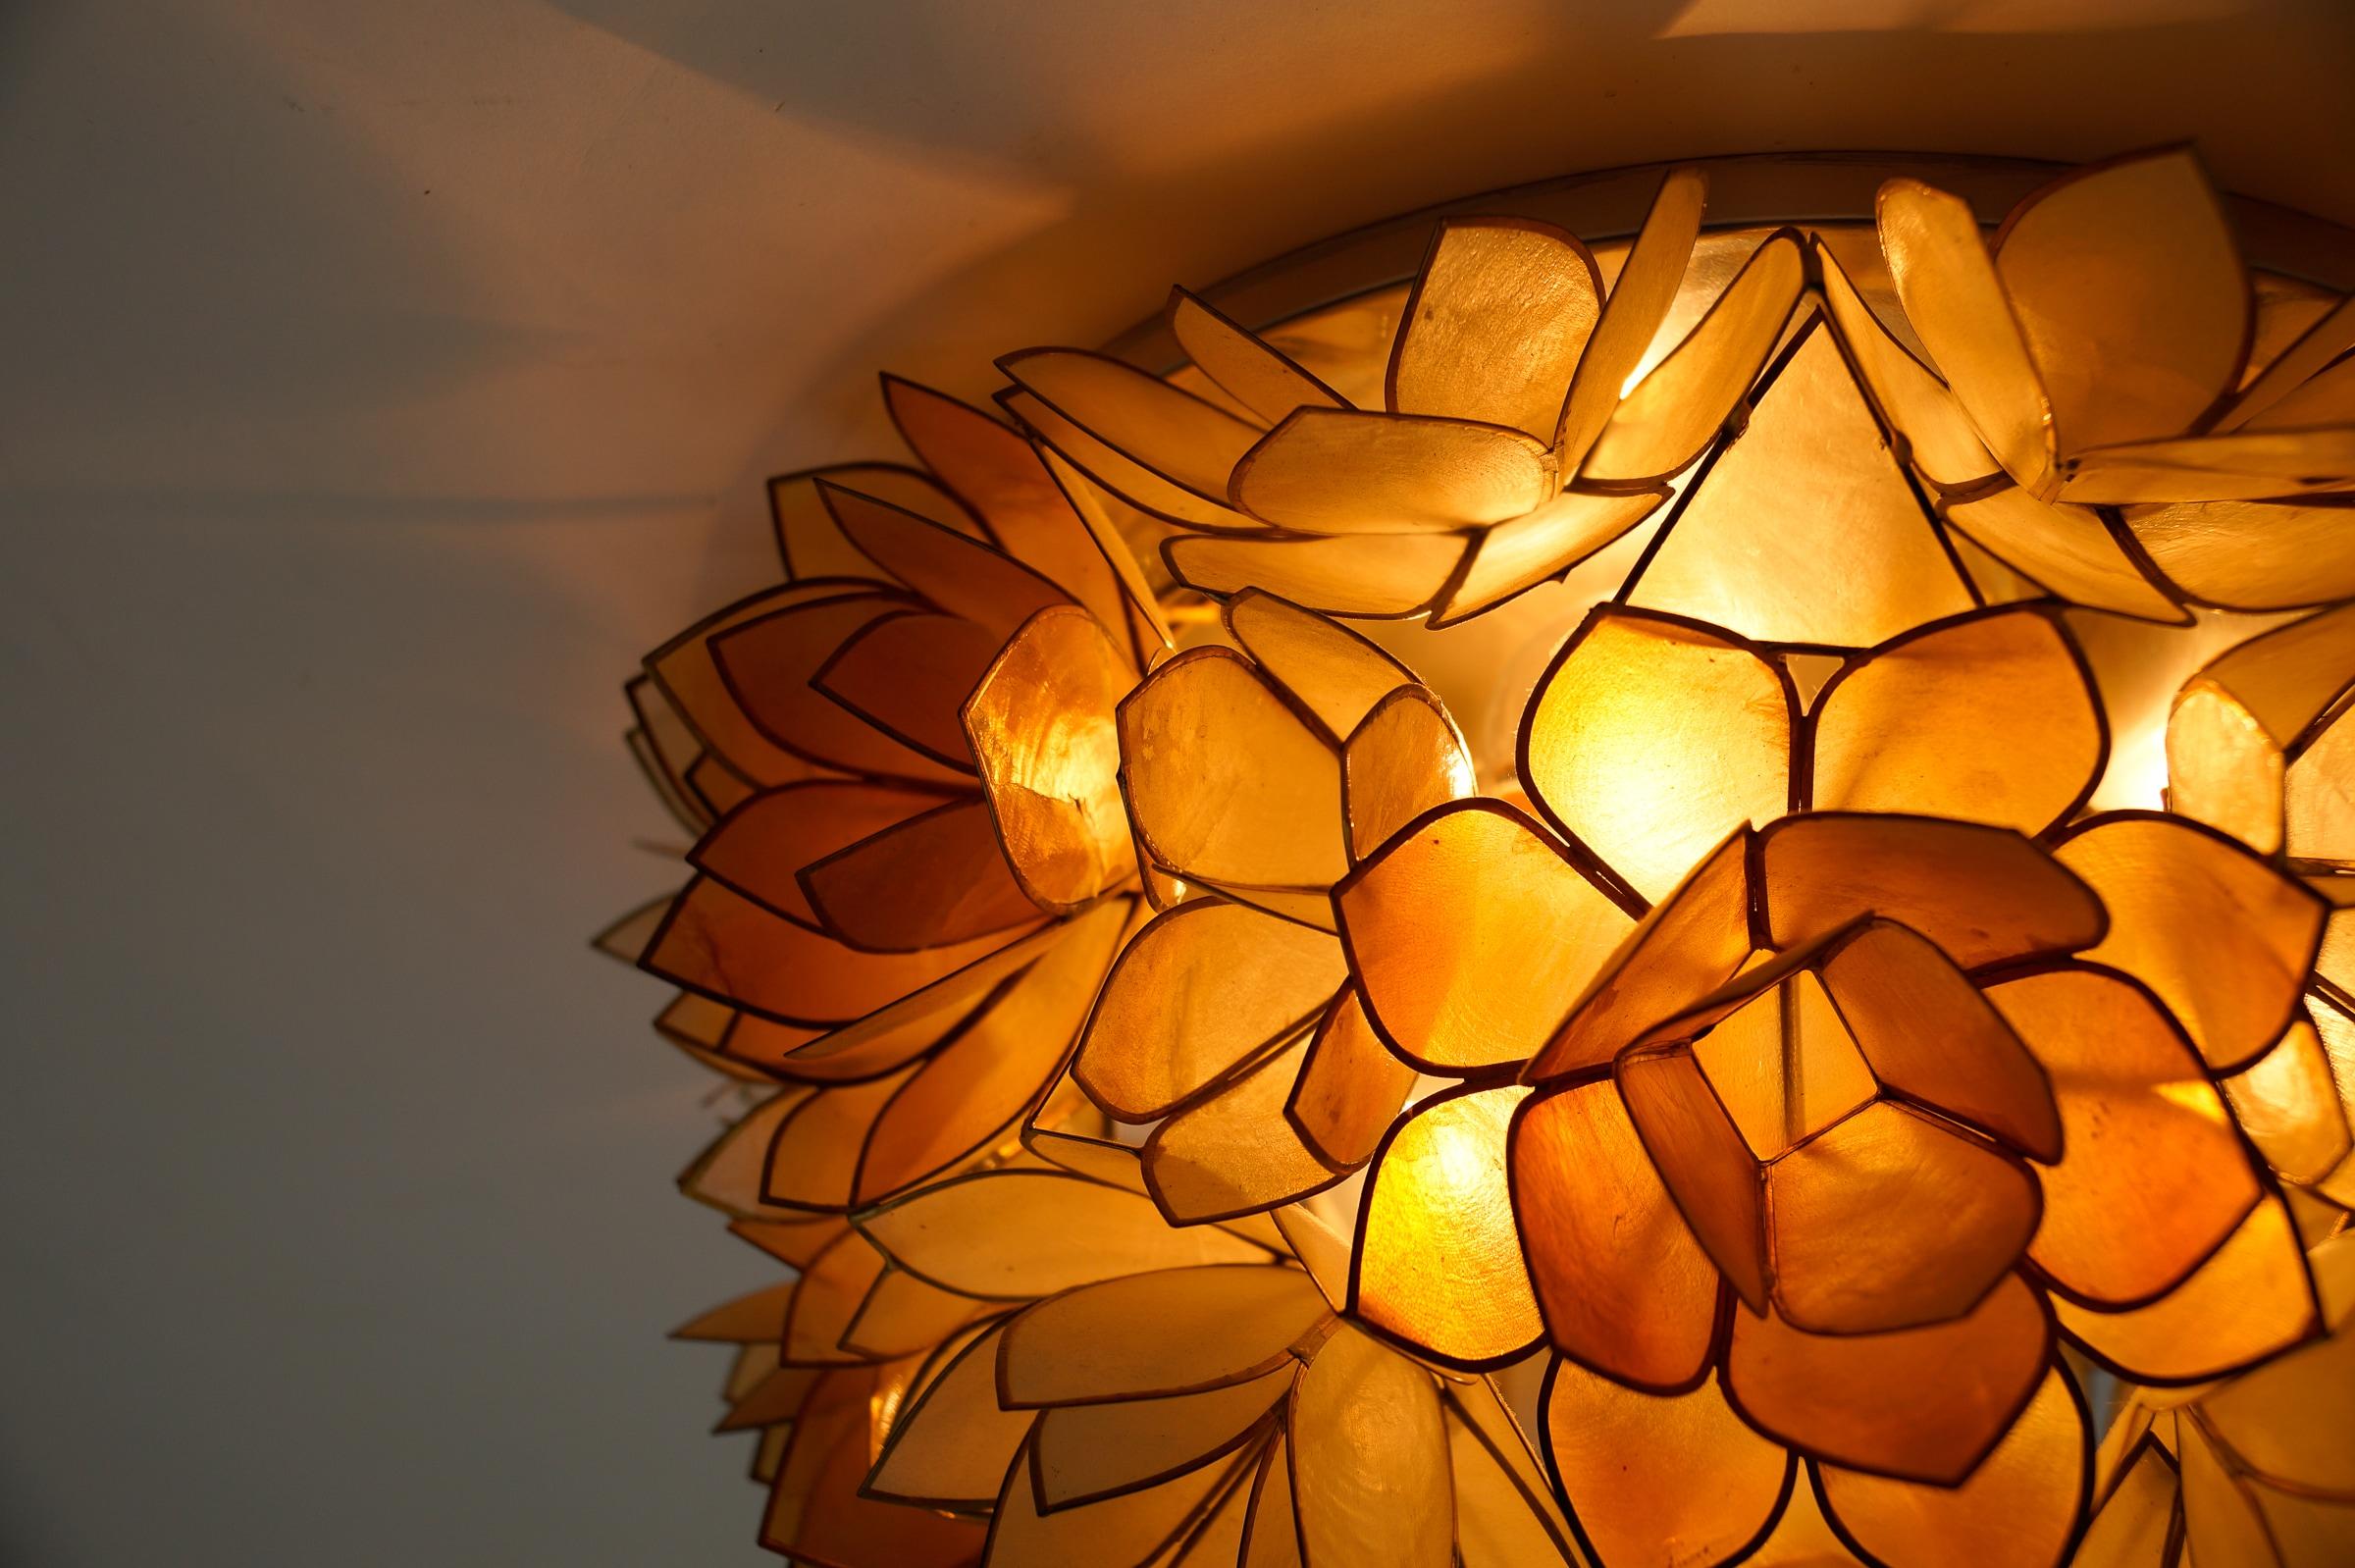 Flower Spherical Wall or Ceiling Lamps Made of Mother-of-Pearl in Orange, 1960s For Sale 4